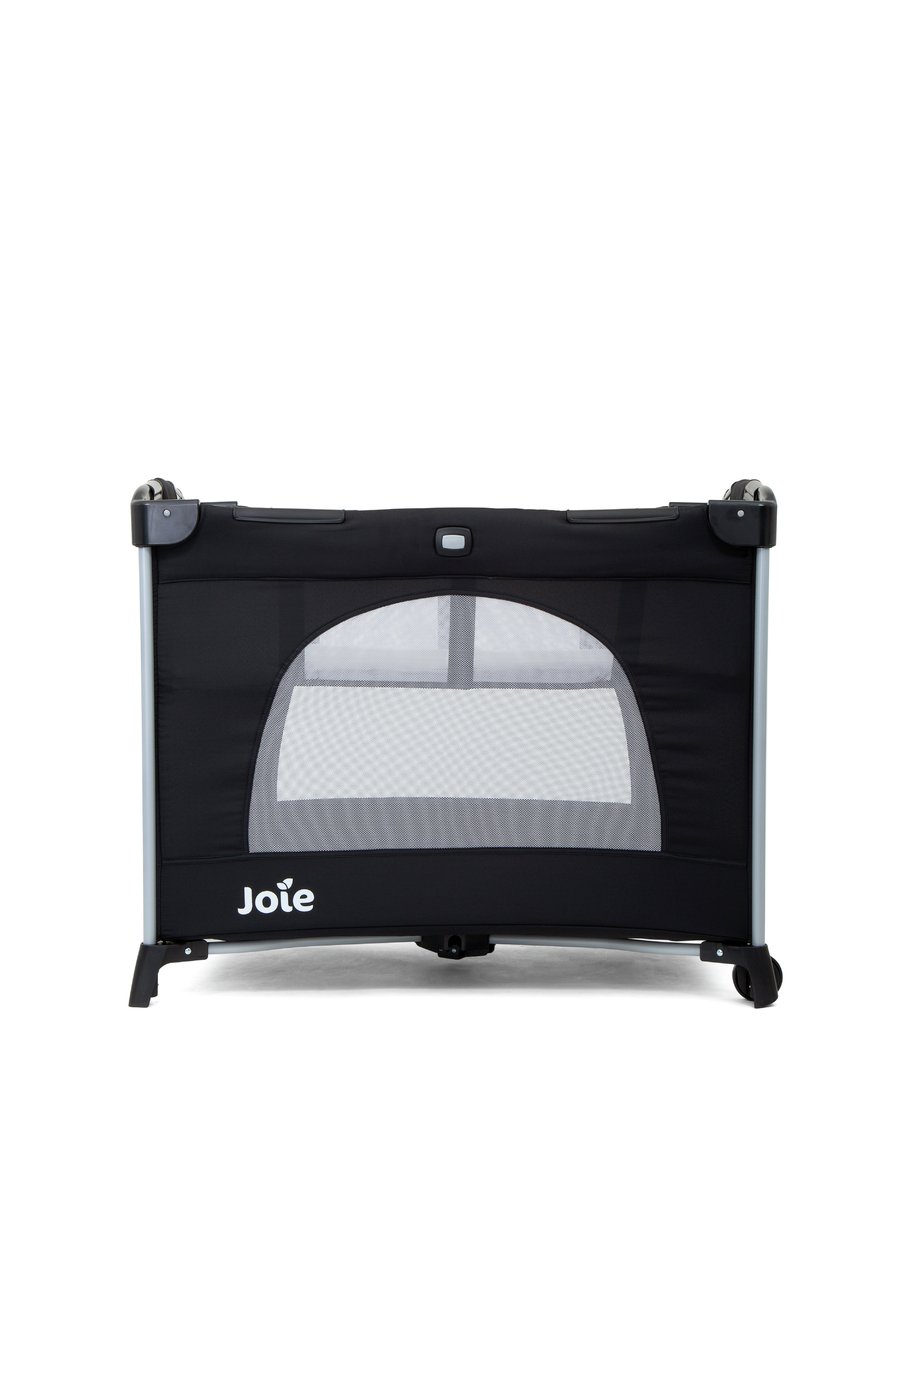 Joie Kubbie Compact Travel Cot Review